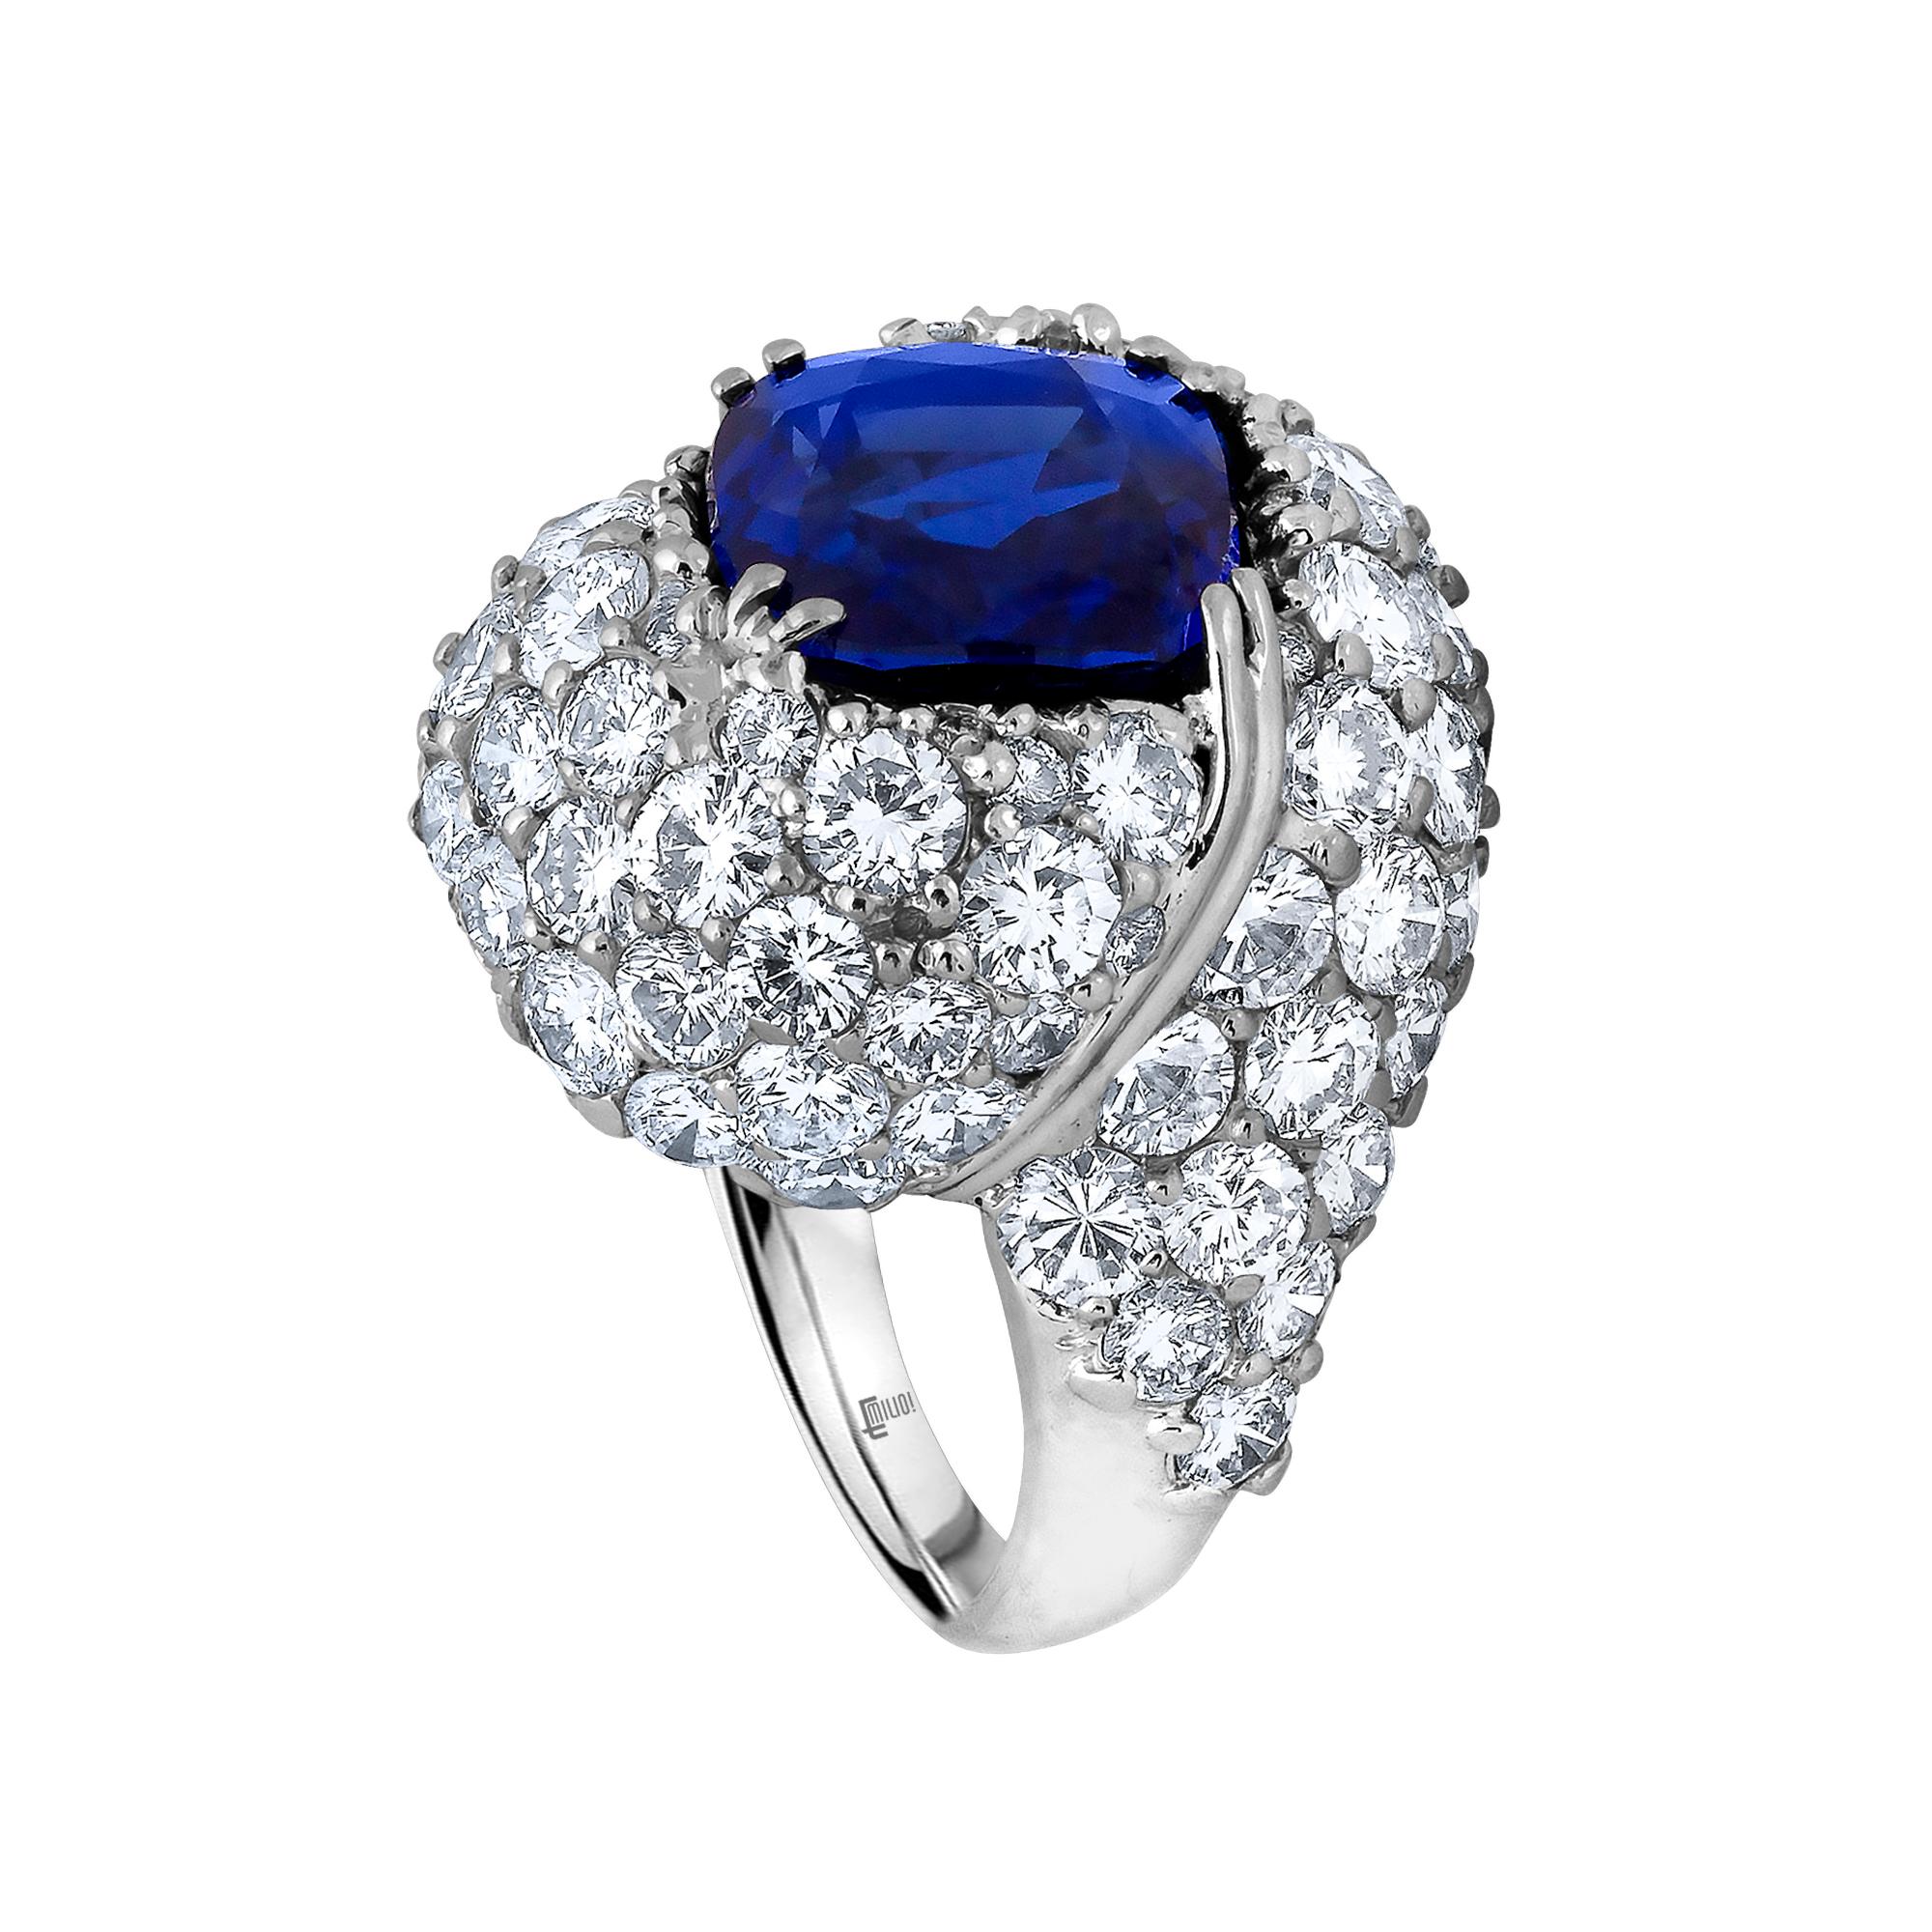 From The Museum Vault At Emilio Jewelry Located on New York's iconic Fifth avenue,
An Ultra Rare Royal Blue high quality Certified untreated and unheated Kashmir sapphire weighing 8.39 Carats in the center. We can happily redesign your dream ring